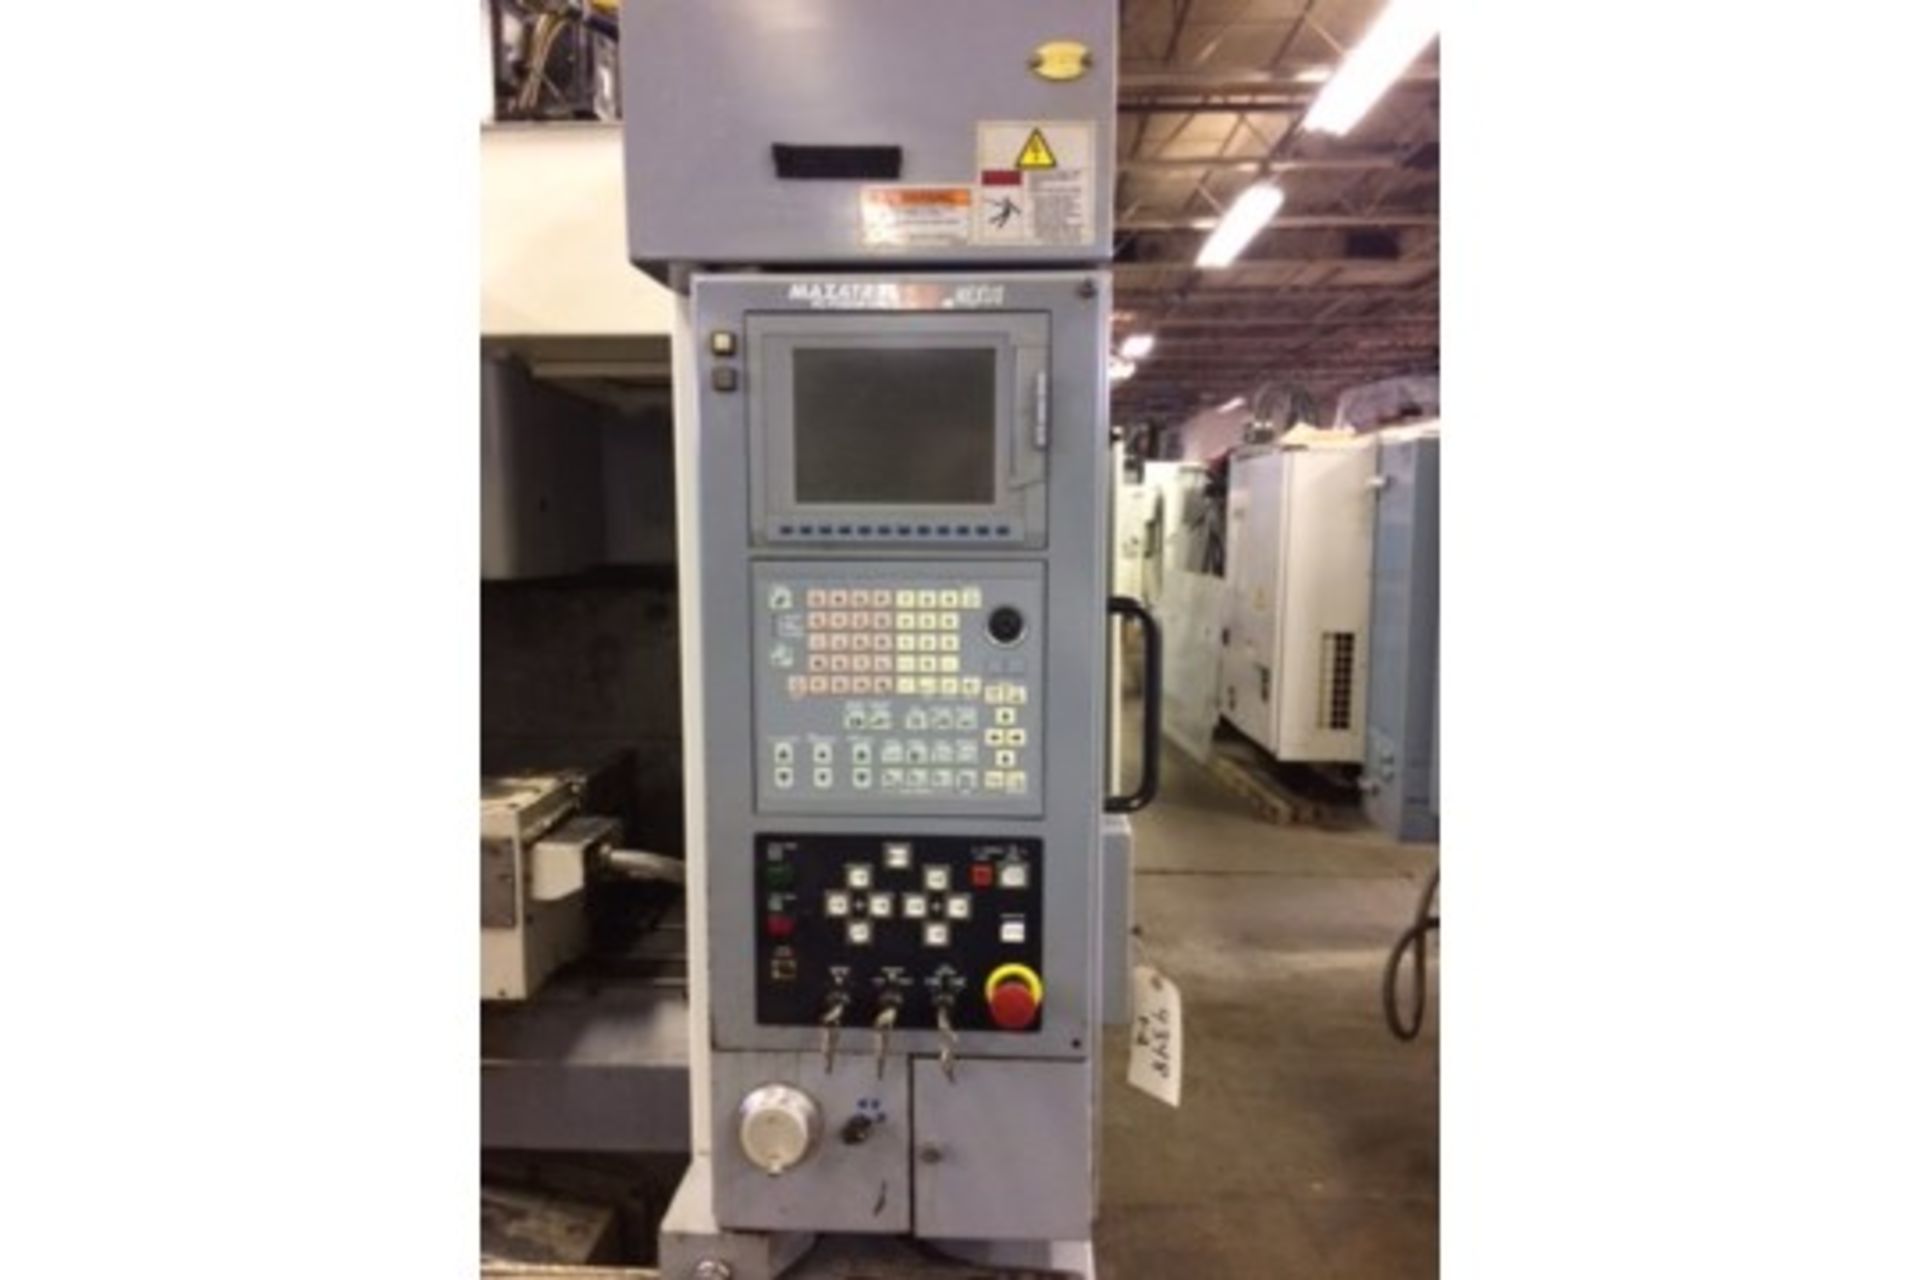 Mazak Nexus Model 410A CNC Vertical Machining Center, with 4th Axis Indexer, S/N 163708, New 2003 - Image 2 of 7